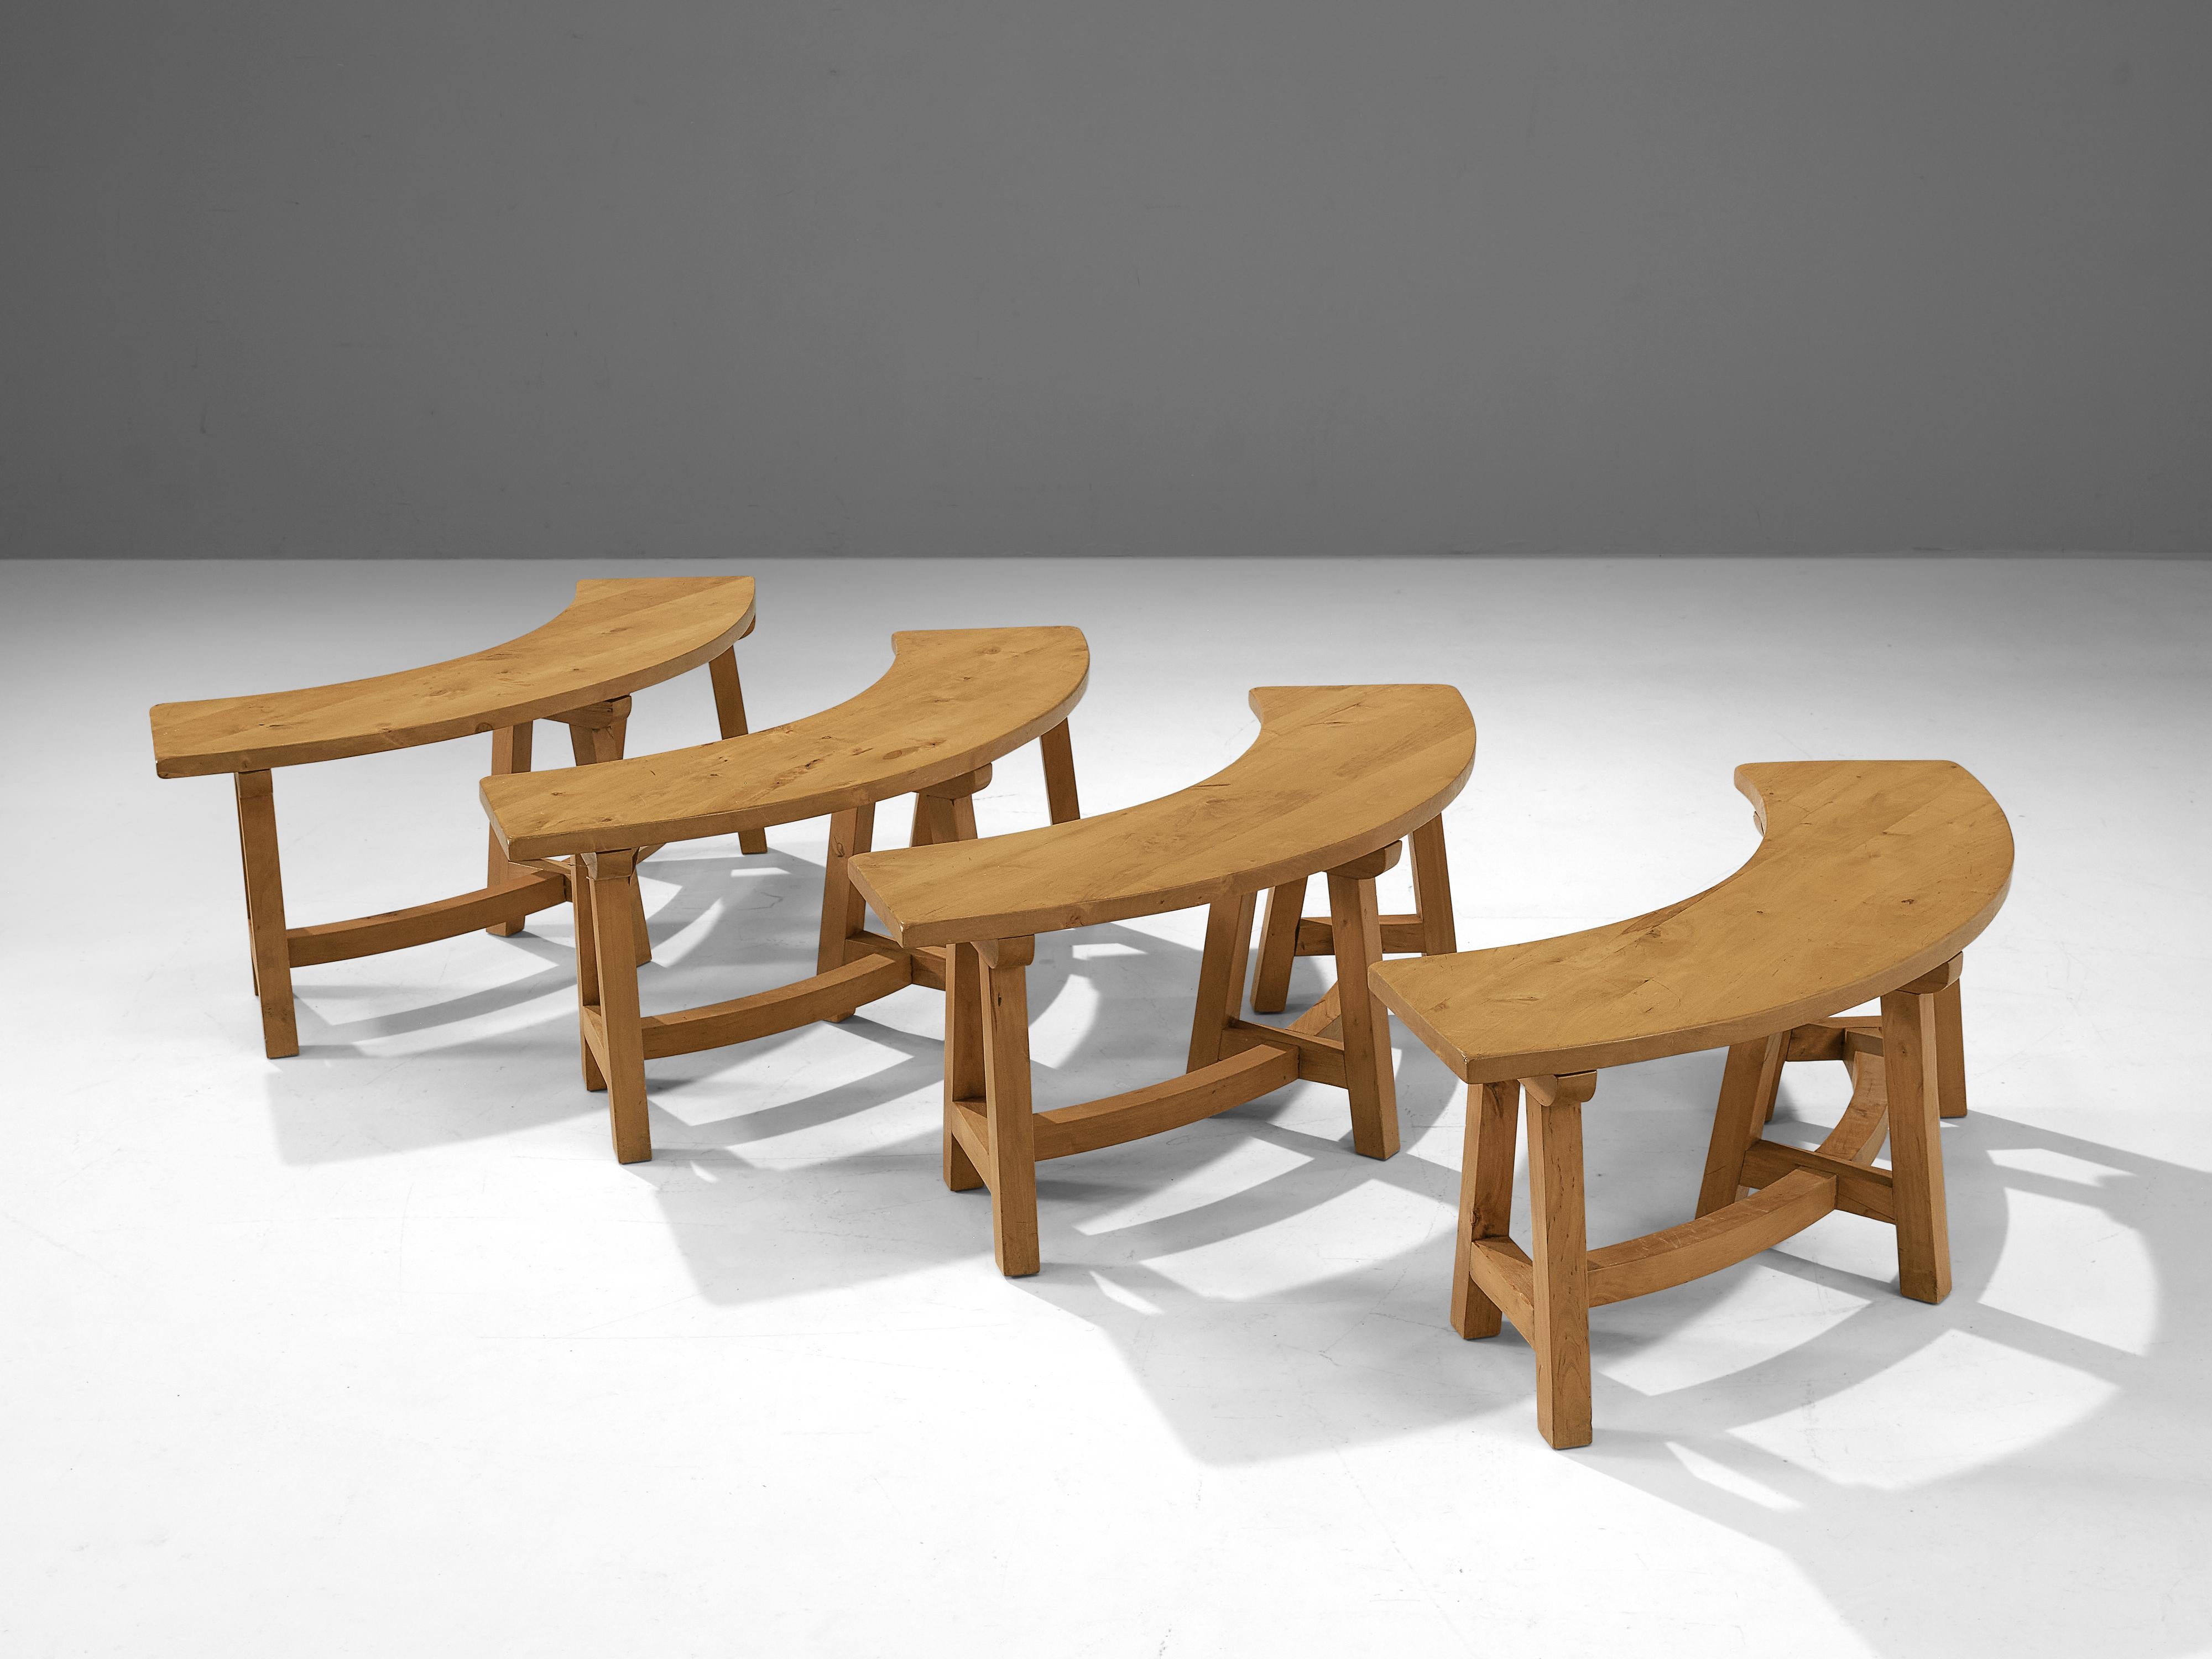 Benches, birch, France, 1960s.

This set of birch benches are designed in the style of Pierre Chapo in the 1960s. A soft, warm all-over patina is visible on the wood on this particular pair. This emphasizes the natural expression of these items. The